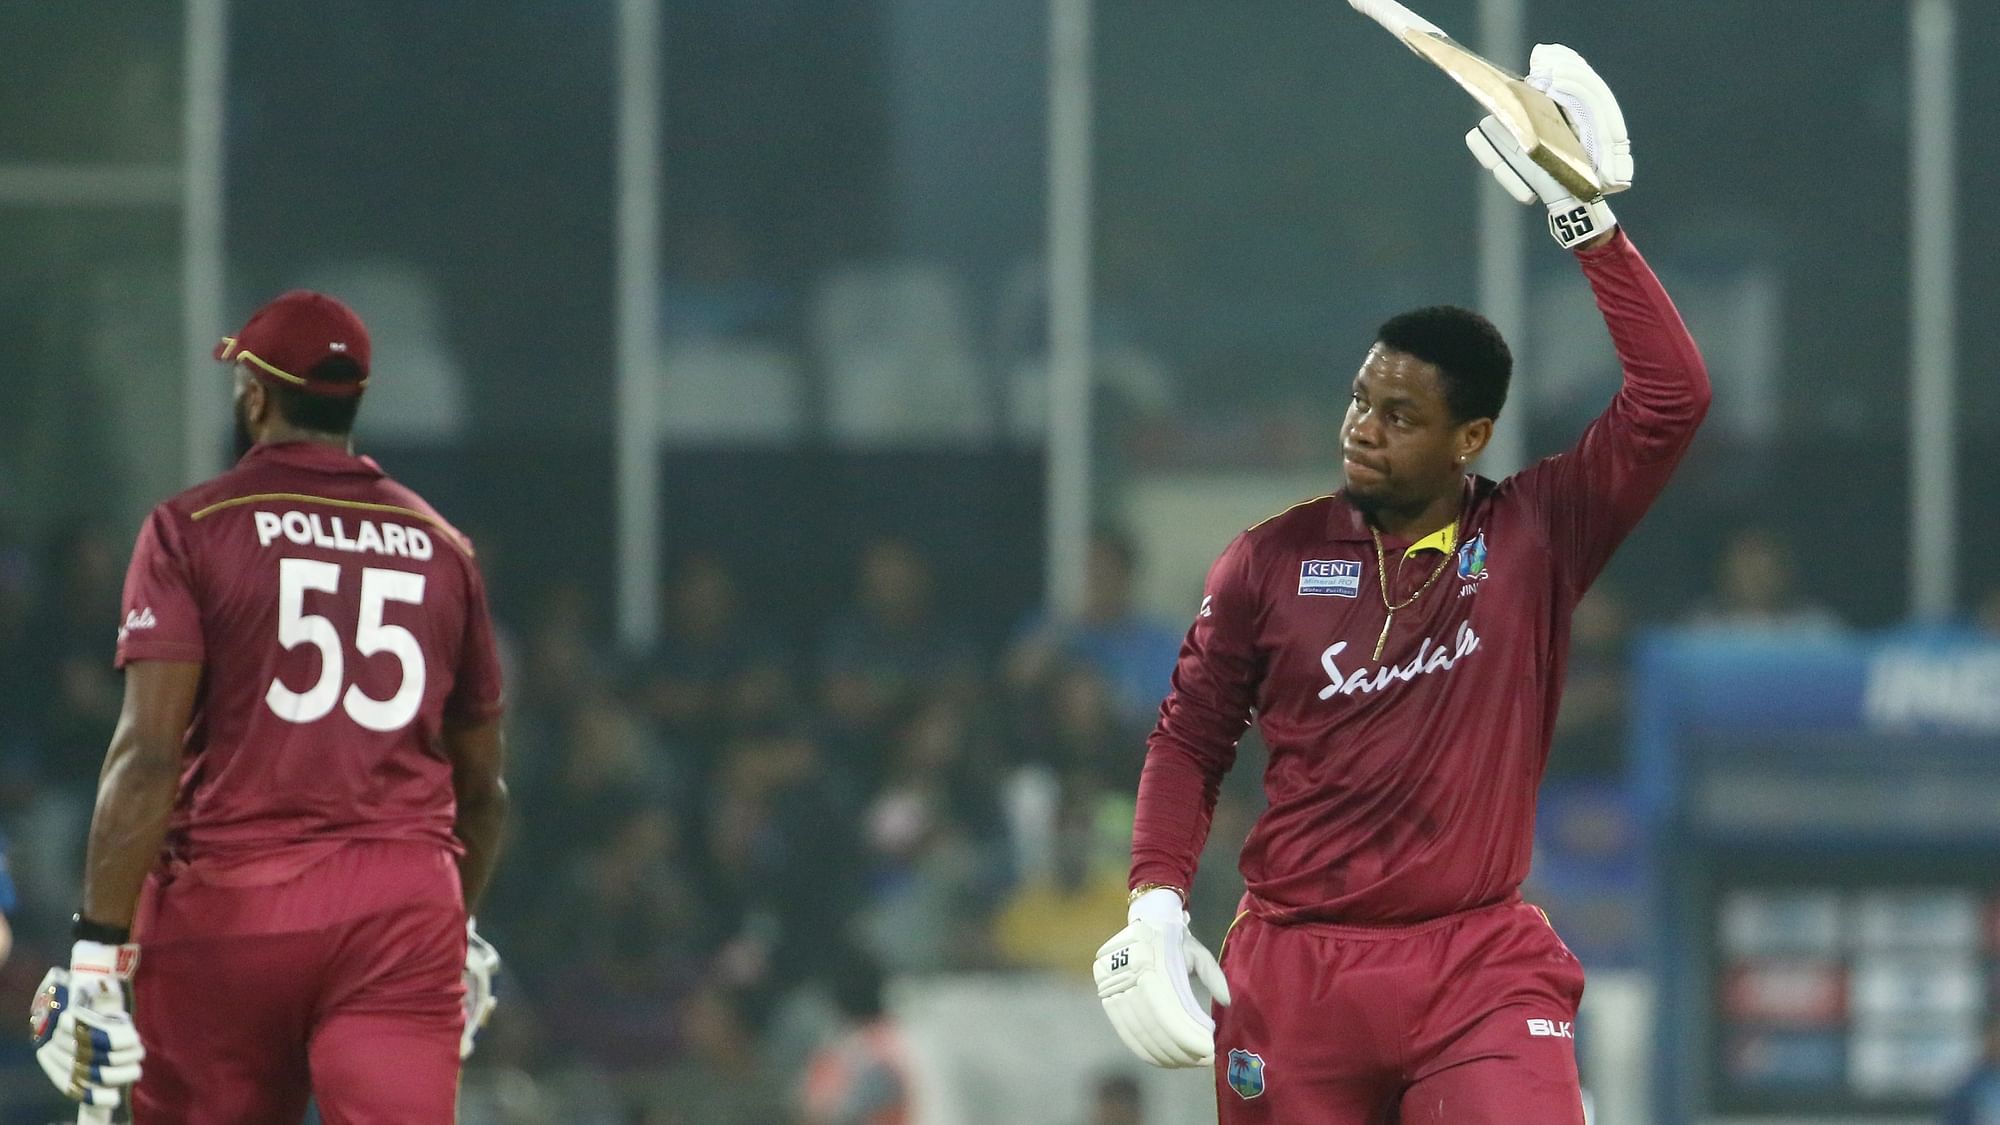 West Indies team produced a fine batting display to post a challenging 207 for 5 against India in the first T20 International.